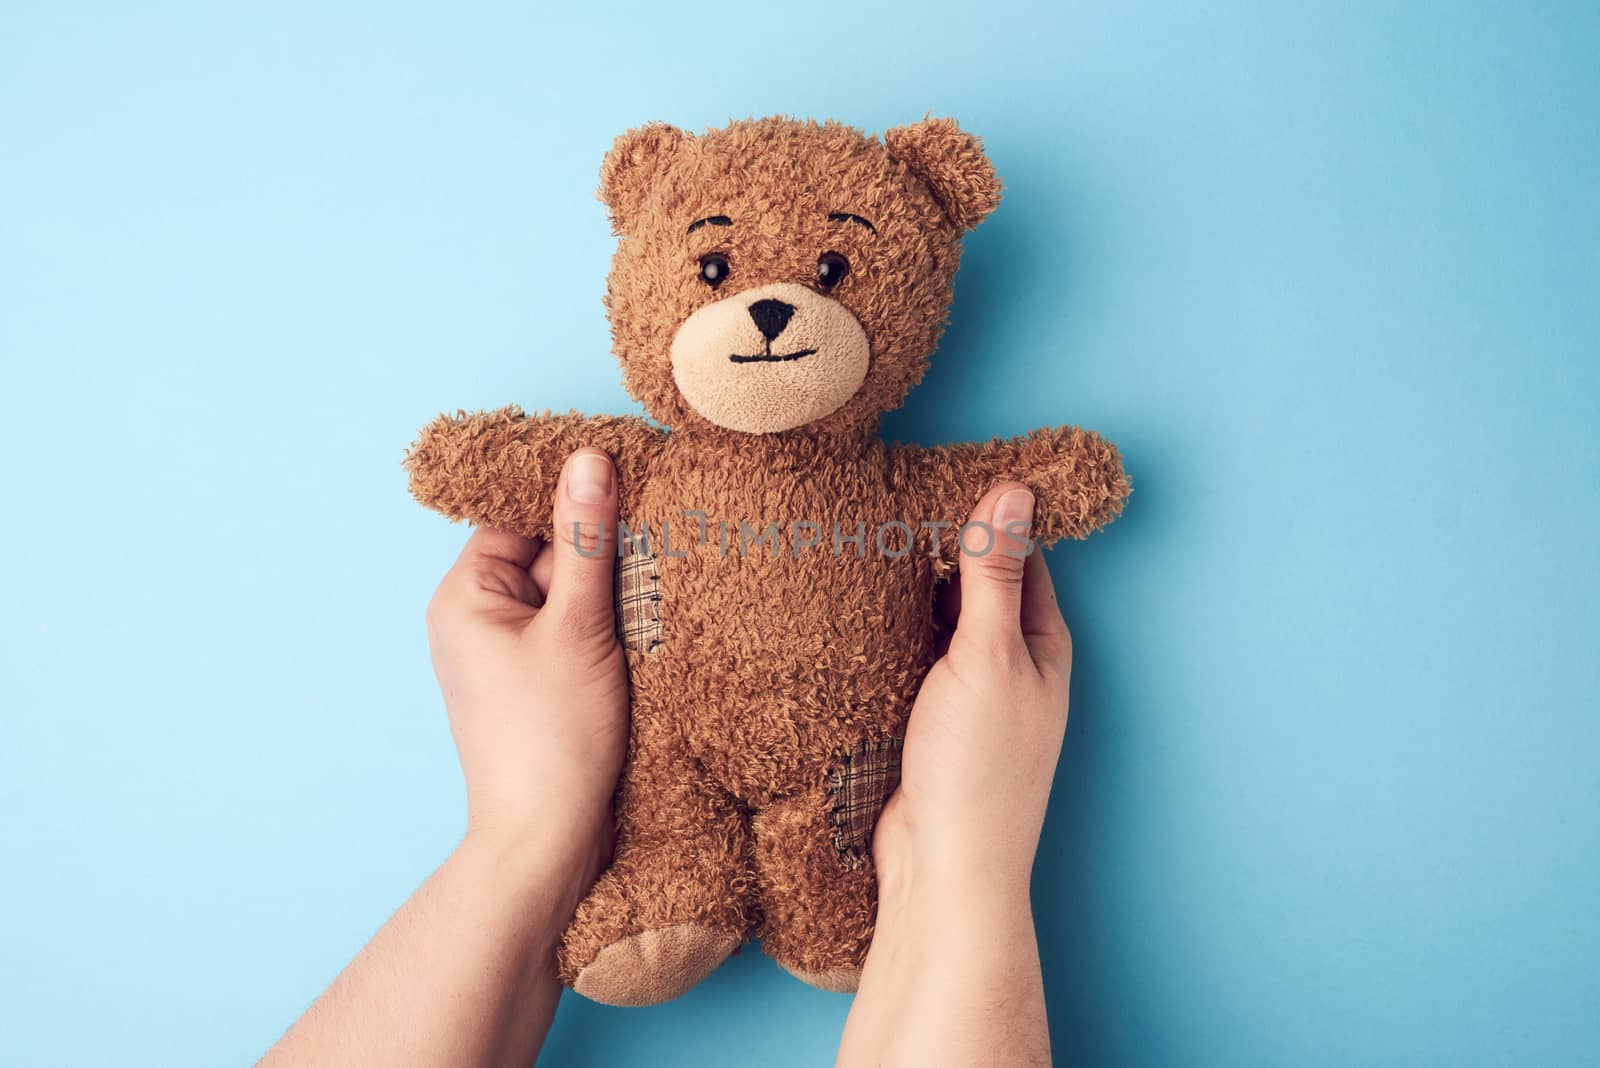 two female hands hold a small brown toy teddy bear on a blue bac by ndanko